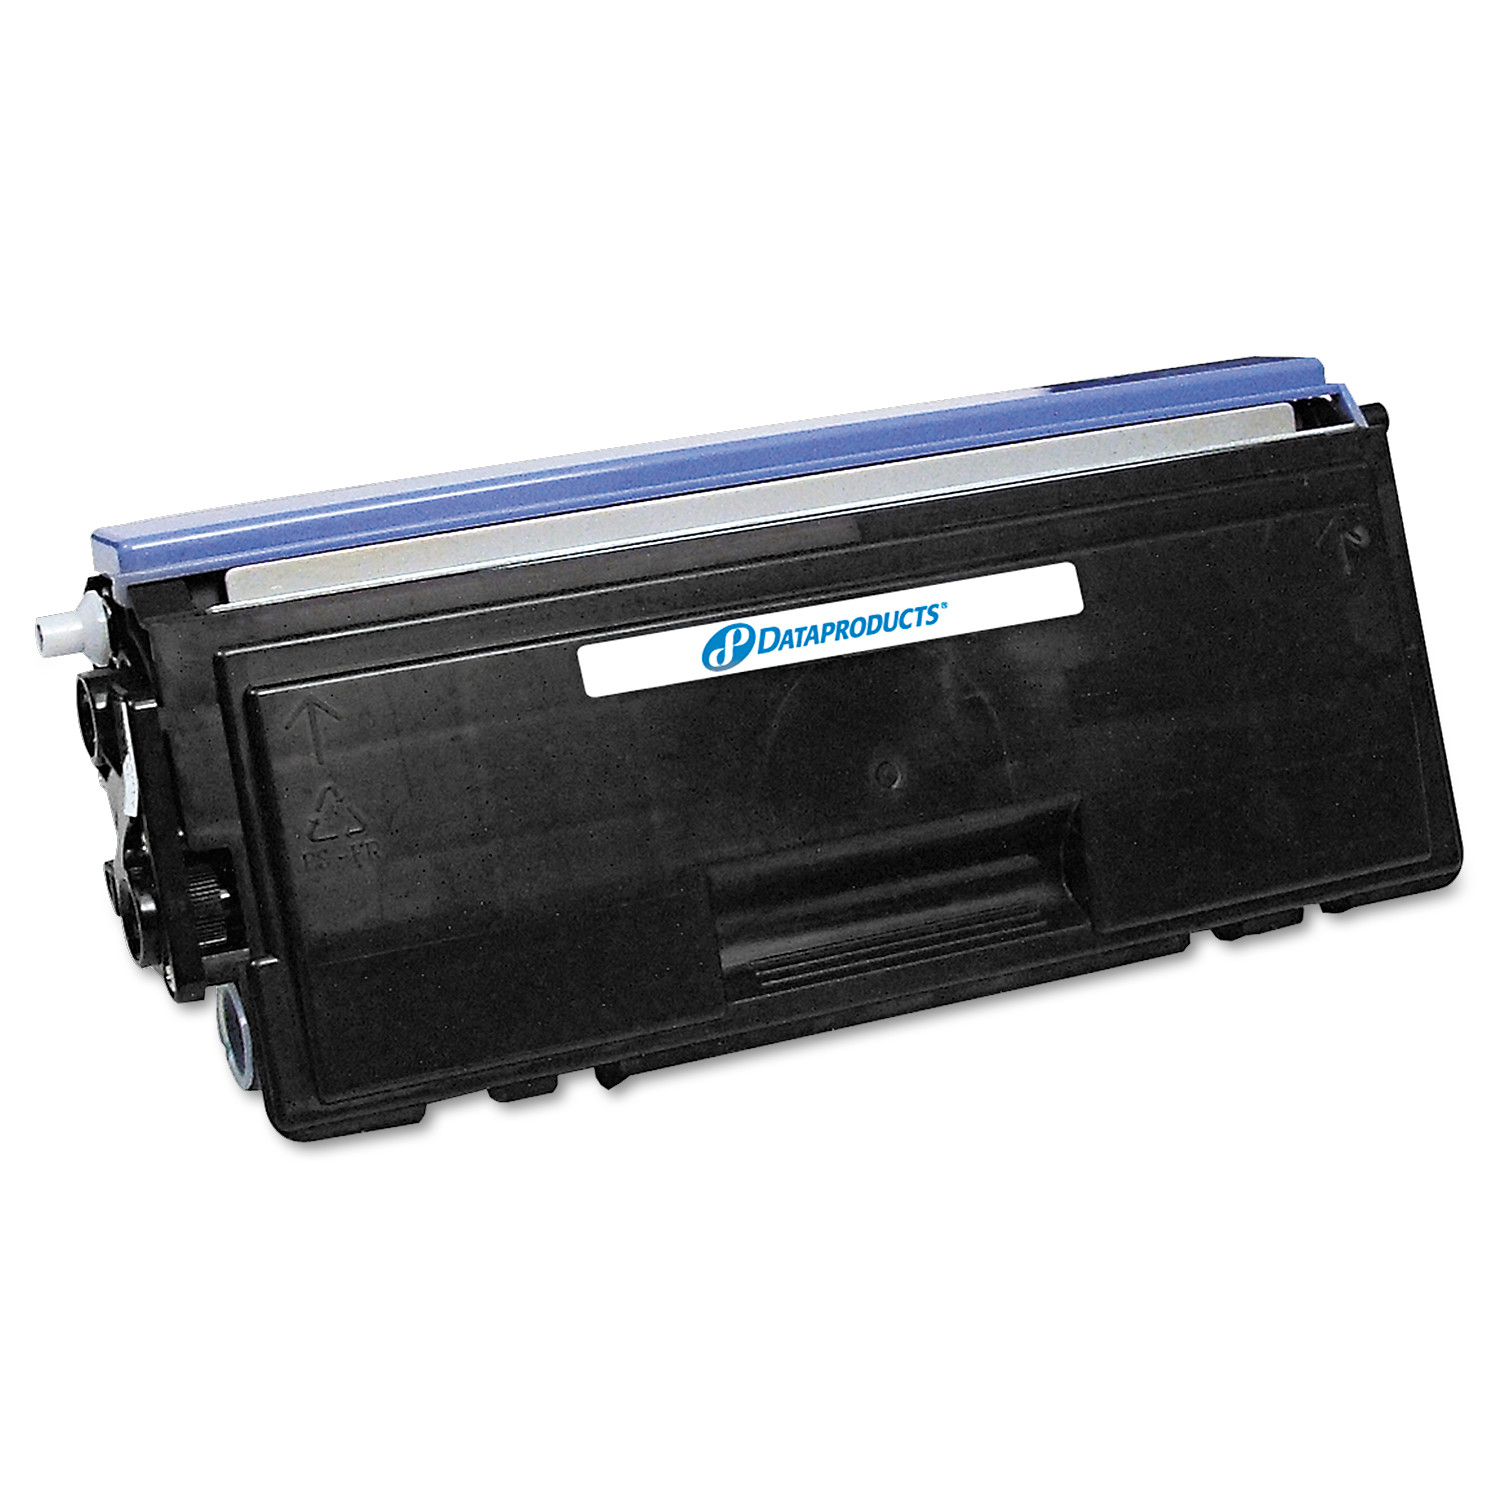 Dataproducts DPCTN550 Remanufactured TN550 Toner, Black - image 1 of 2